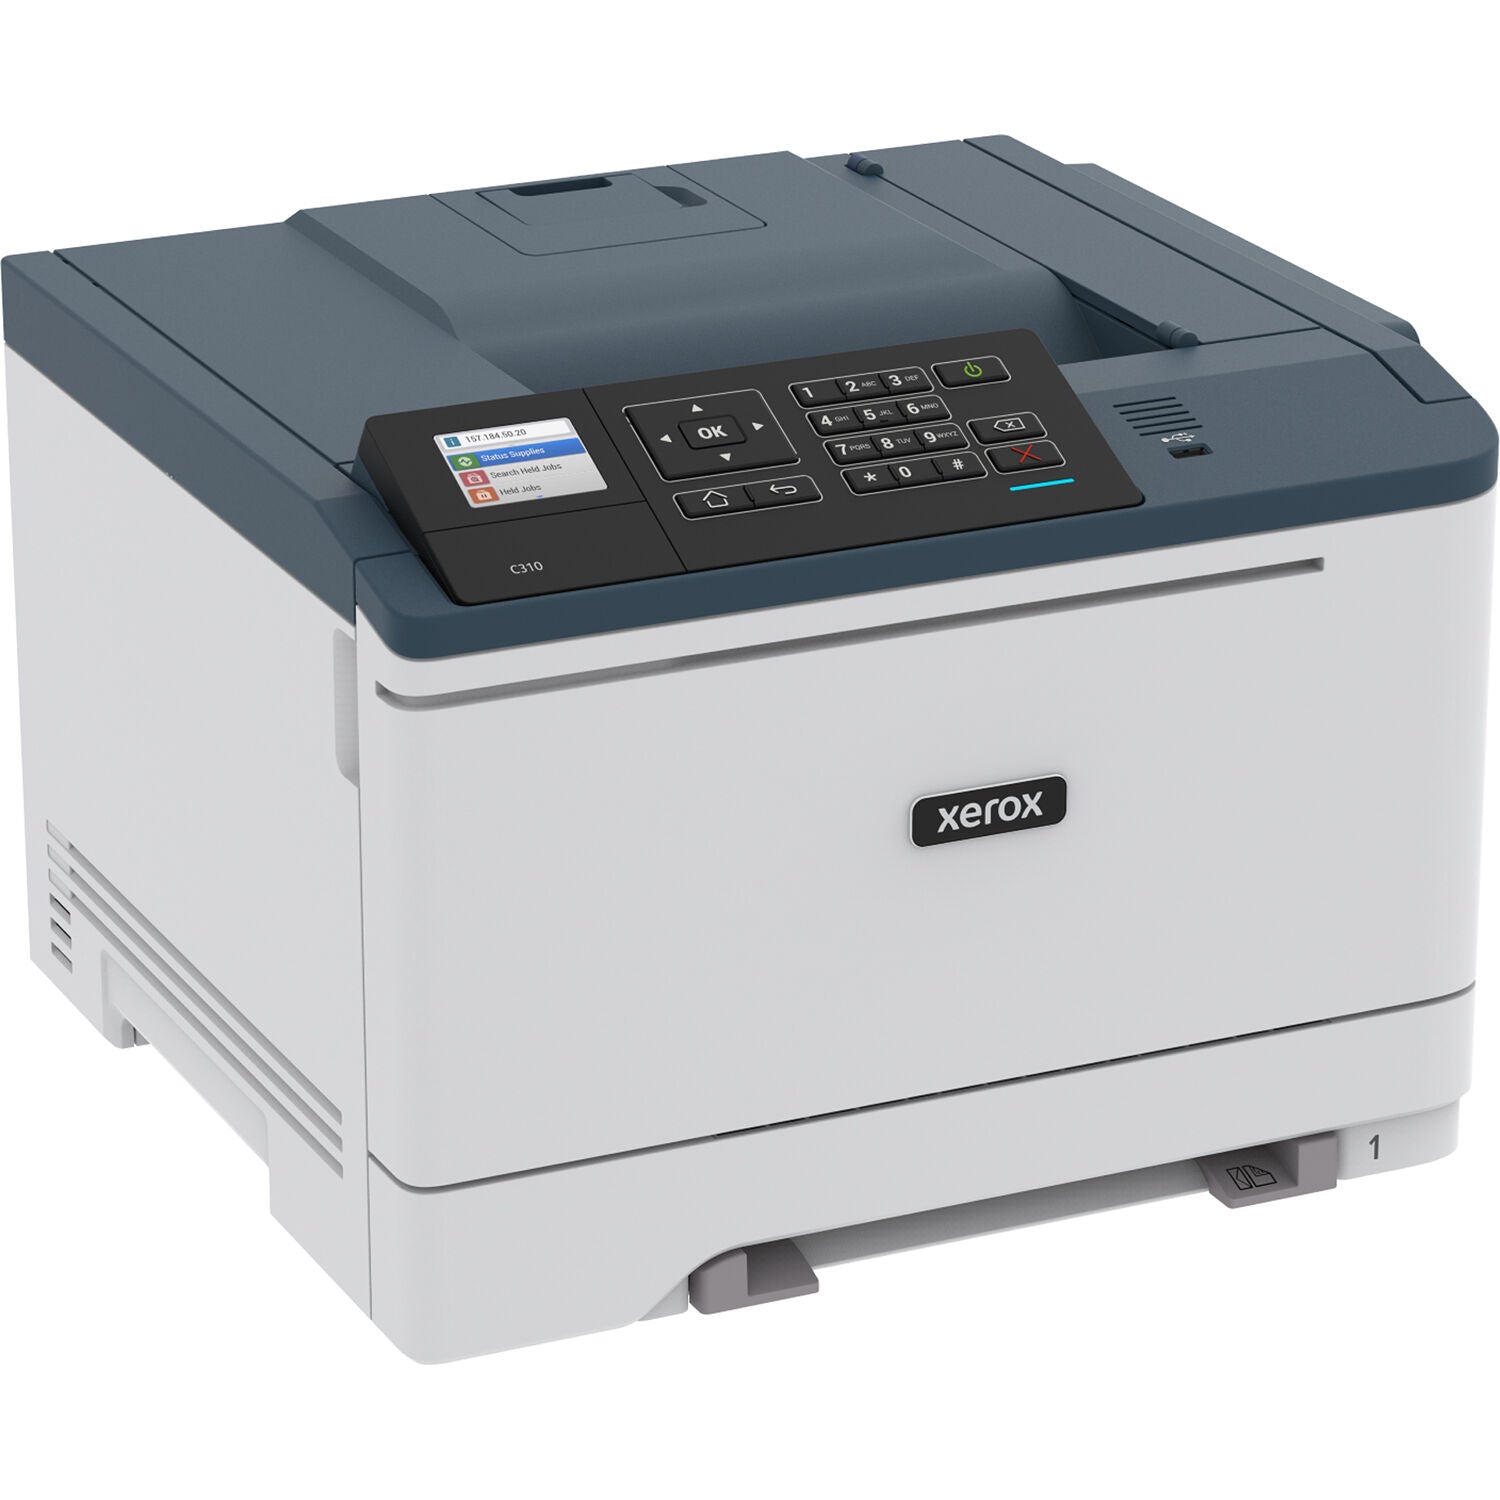 Meet The Wireless Xerox C310/DNI Single Function Color Laser Printer With Automatic 2-Sided Print, USB/Ethernet/Wi-Fi - Perfect For Small Workgroup Or Office And Easy To Setup